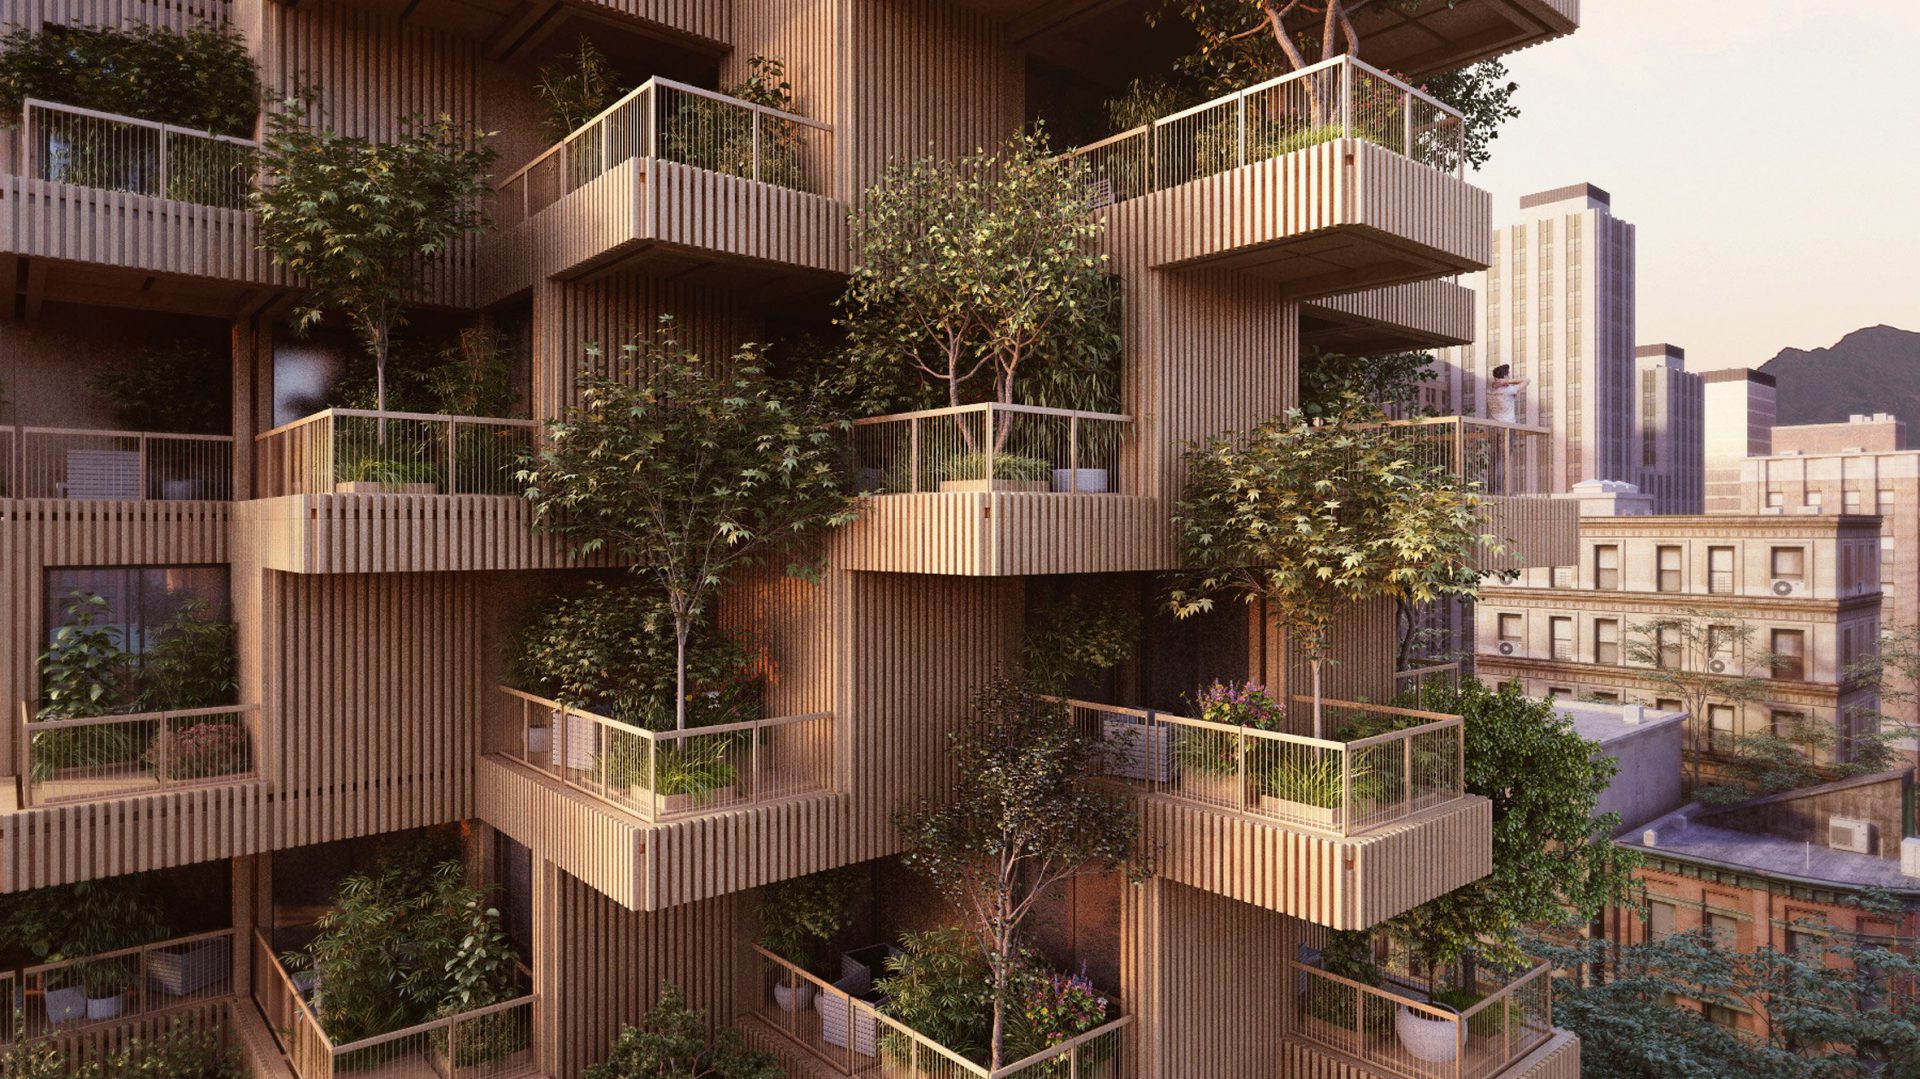 Timber Tower by Penda